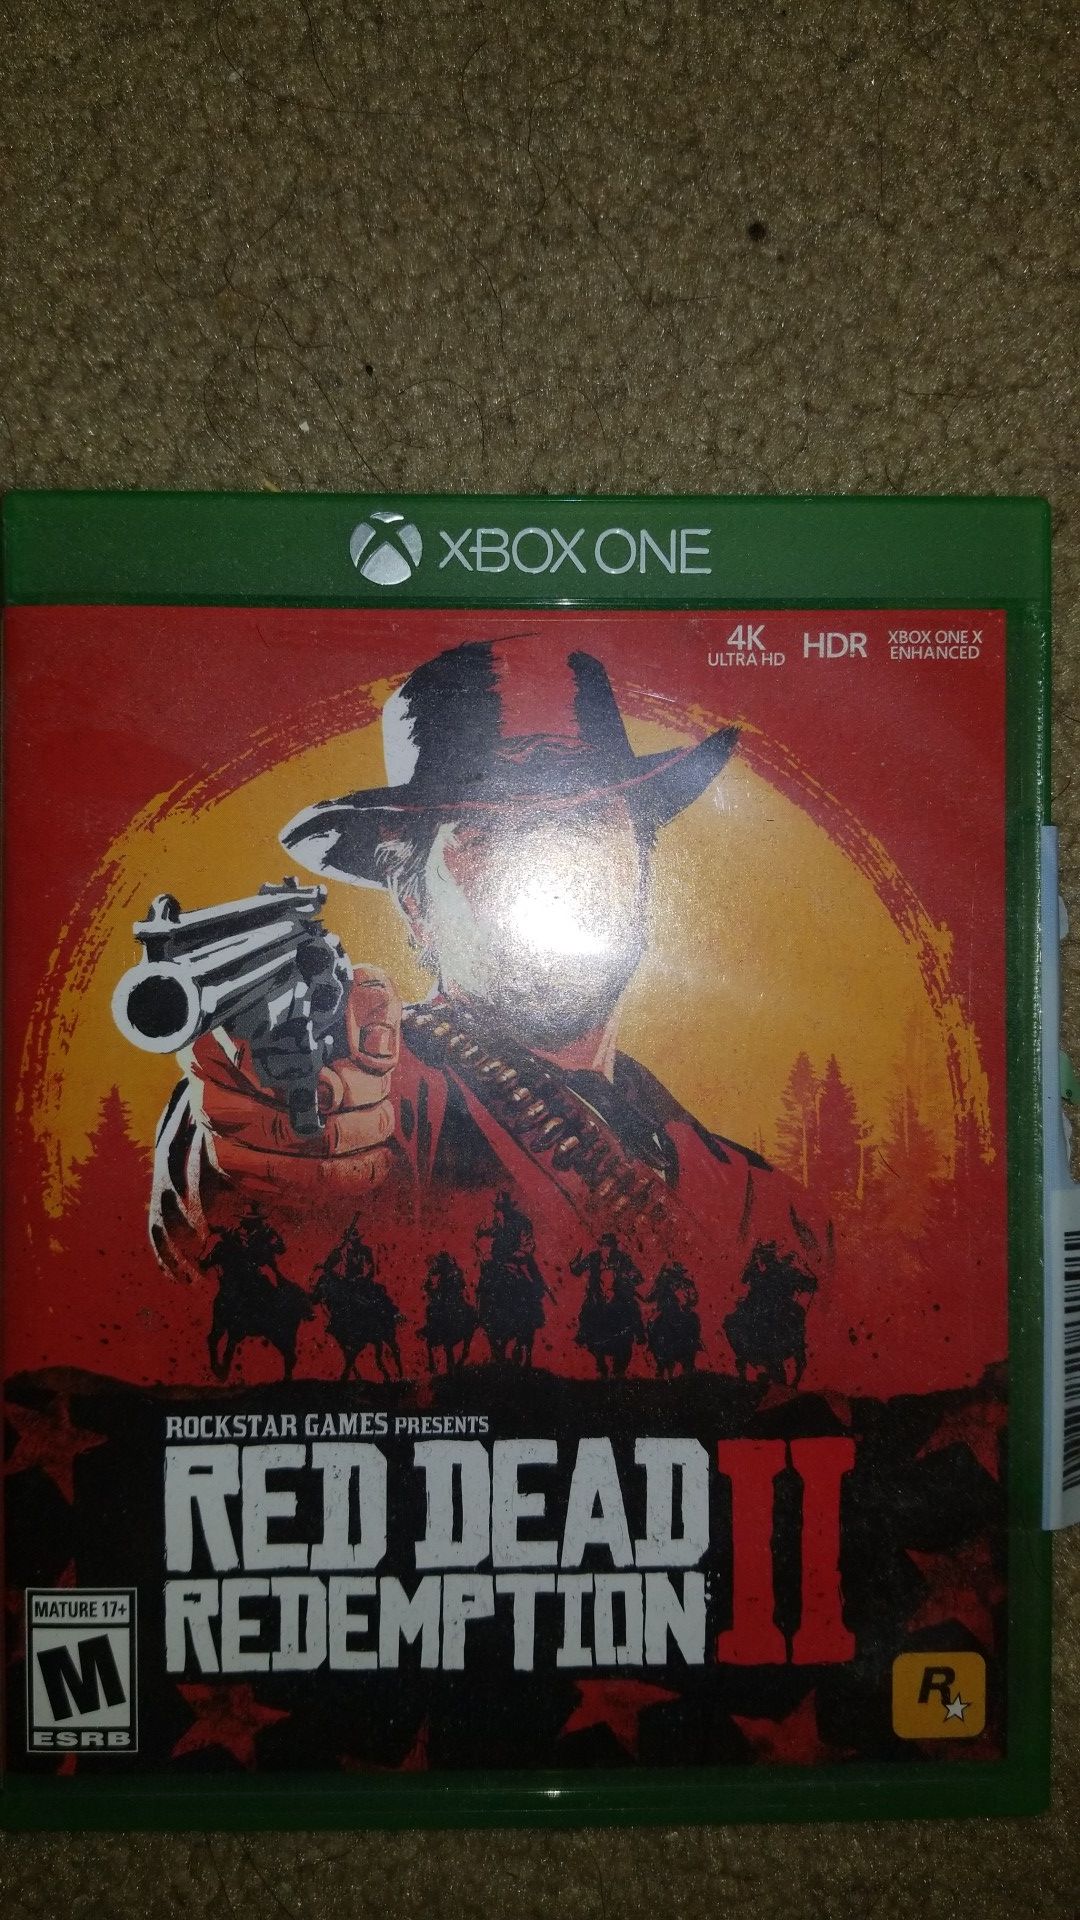 Red Ded Redemption 2 for XBOX One, Map/poster included, minty fresh condition